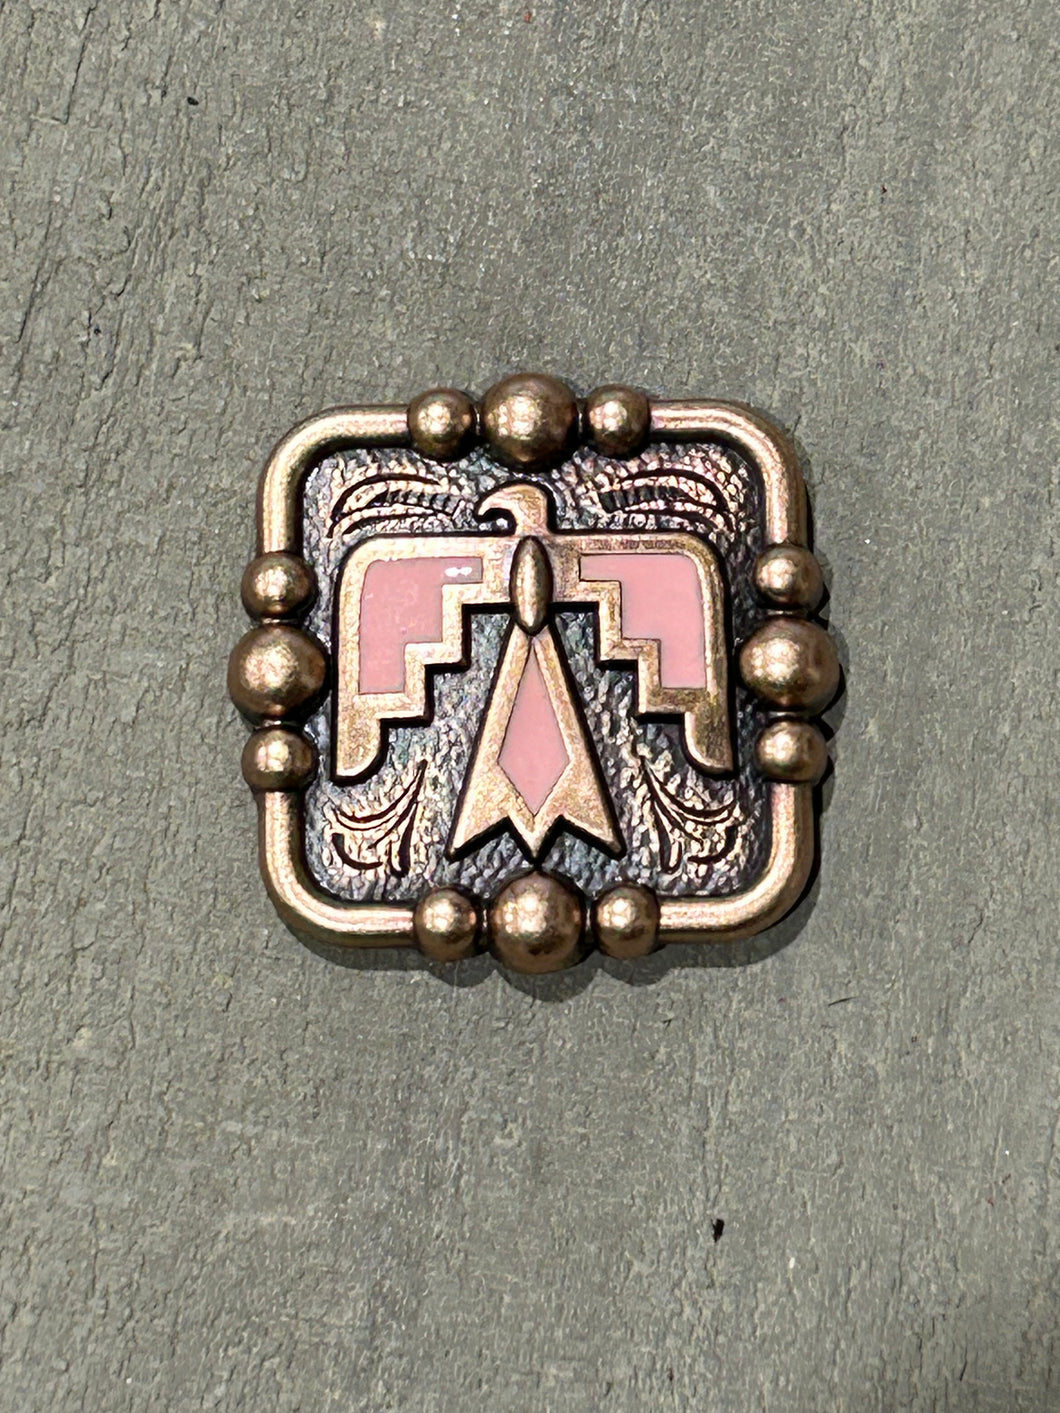 1.5” Copper Thunderbird Concho with pink color enamel